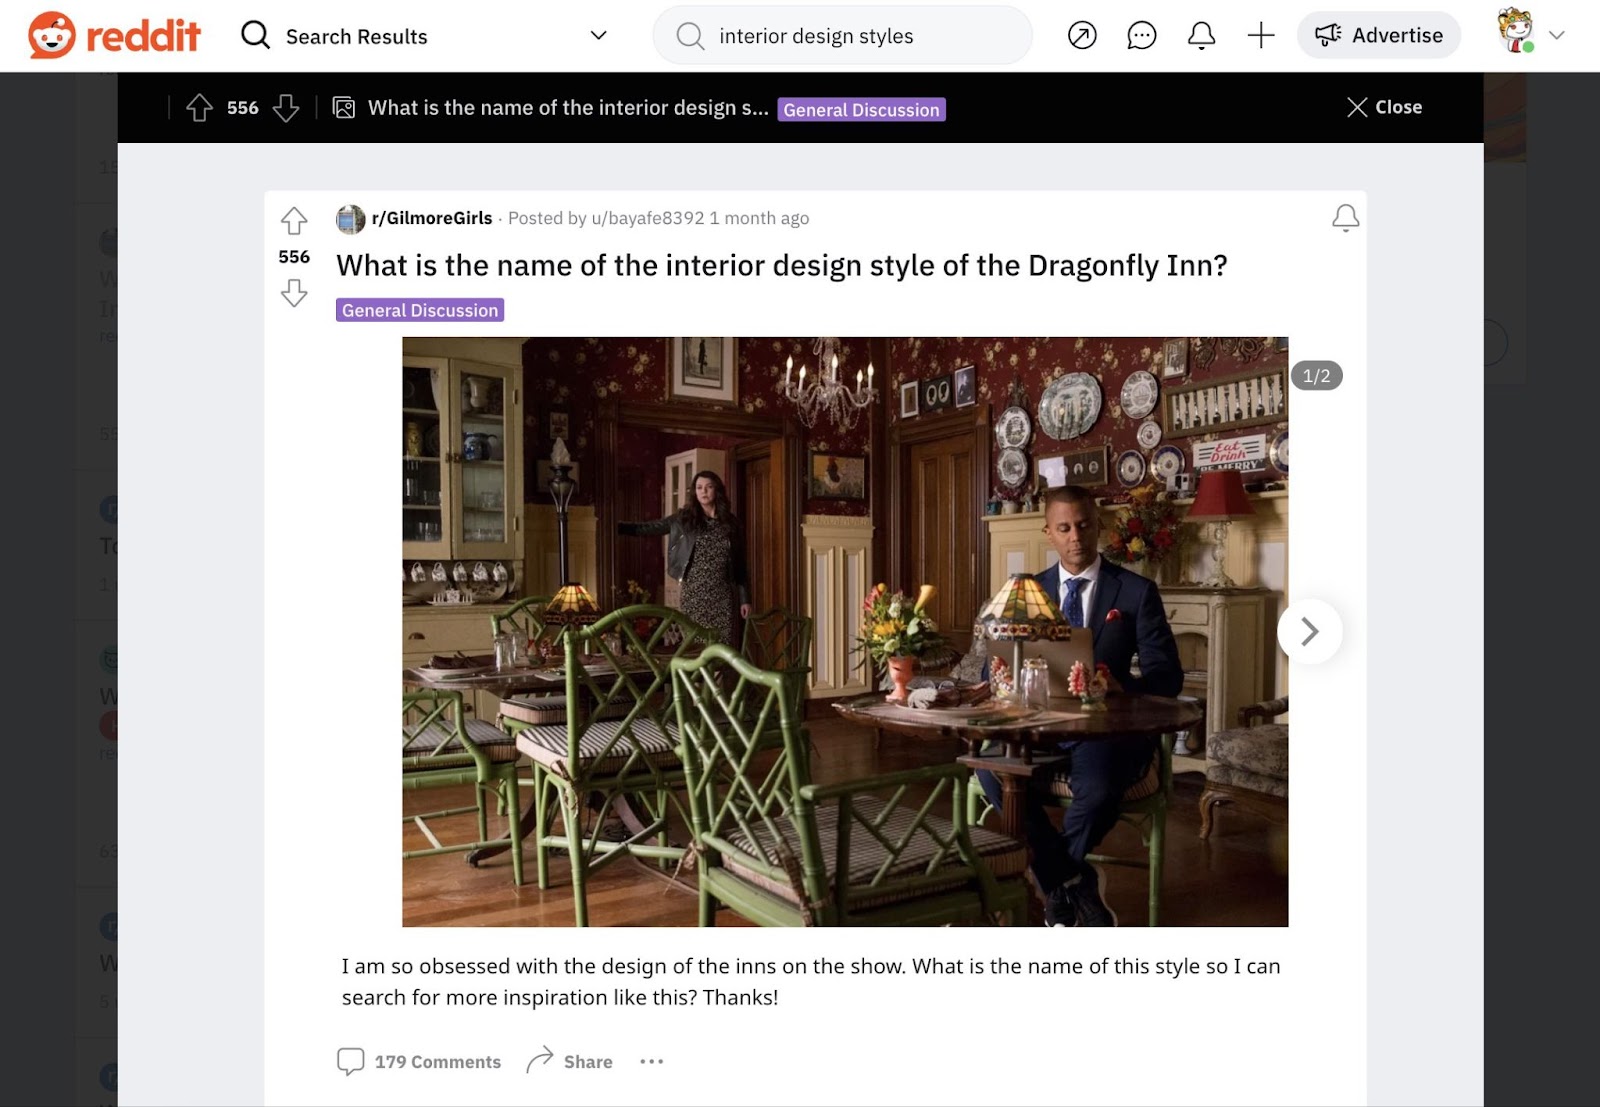 "What is the name of the interior design style of the Dragonfly Inn?" question on Reddit